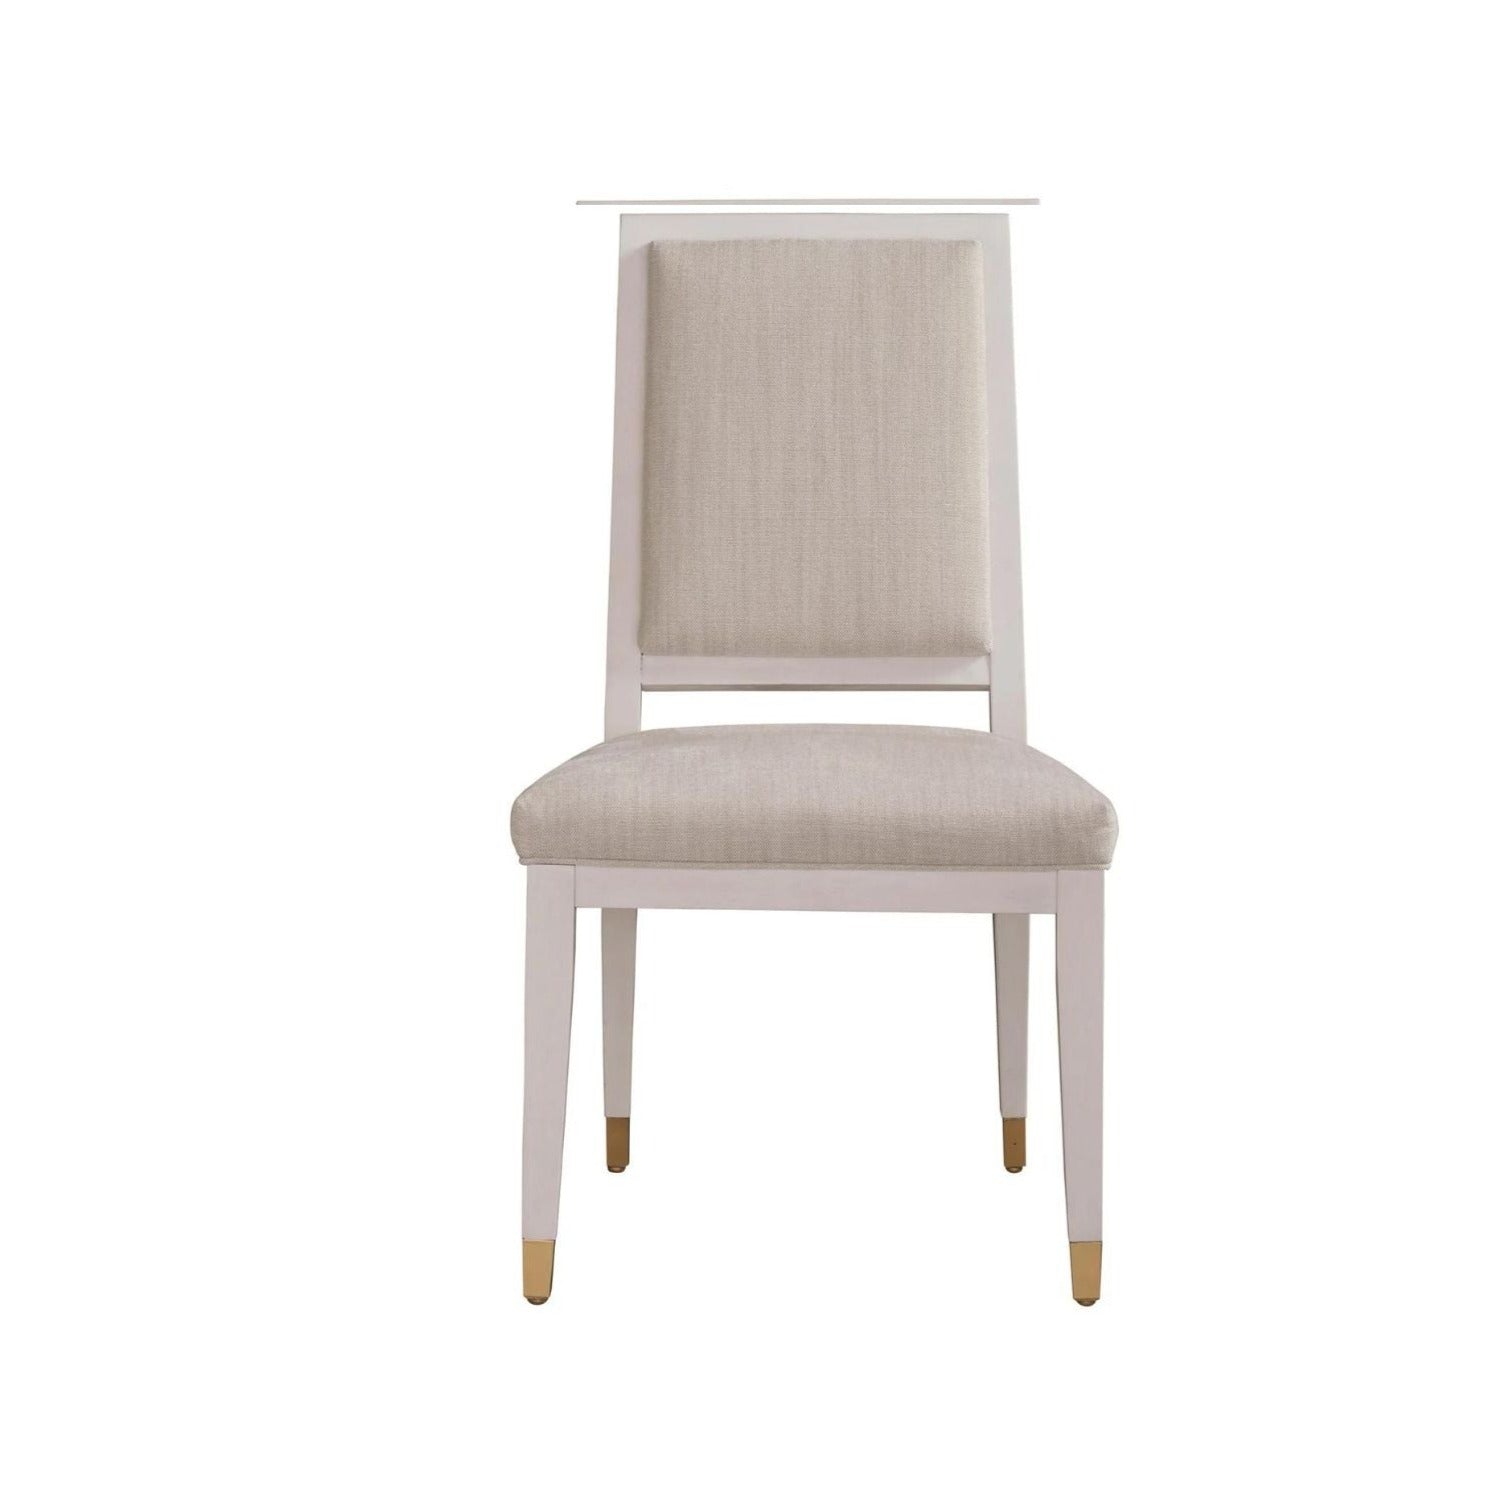 Dining chair with wood frame around seat and front top. Legs are capped at bottom with a decorative gold caps. Top of chair on back side is a solid wood pattern. Seat and back are covered with pewter colored fabric. 